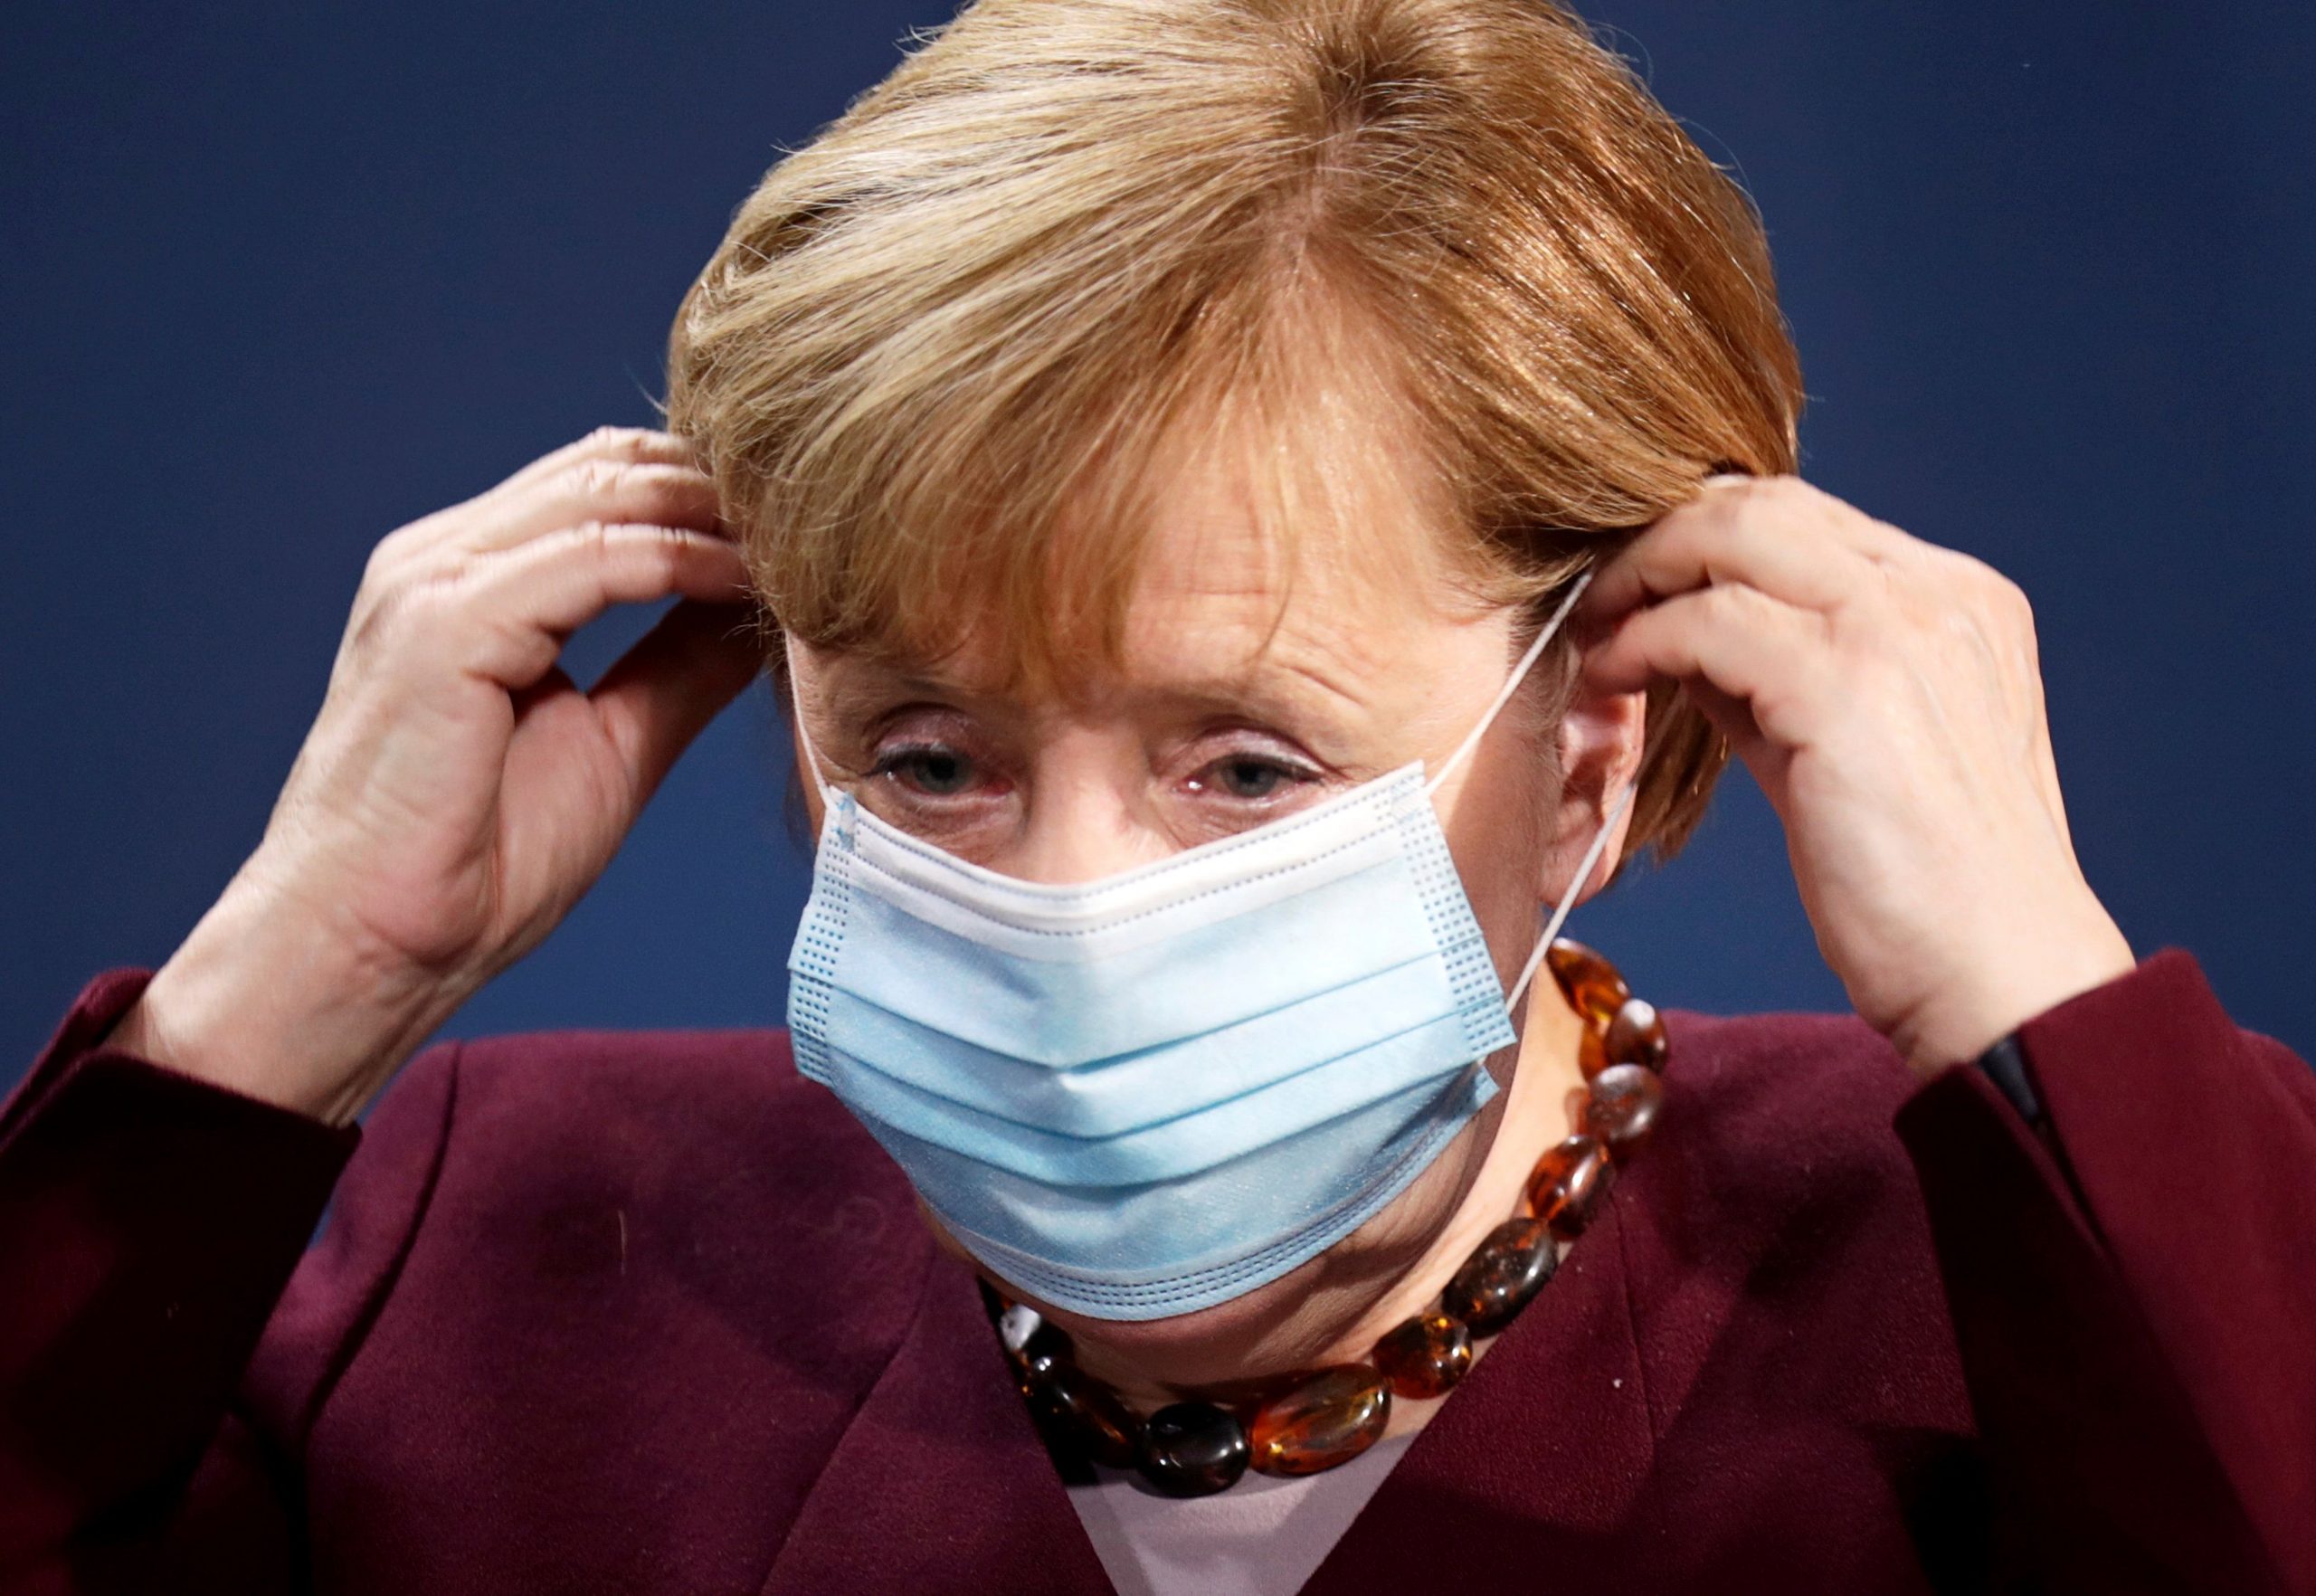 Coronavirus rages in German regions with far-right leanings